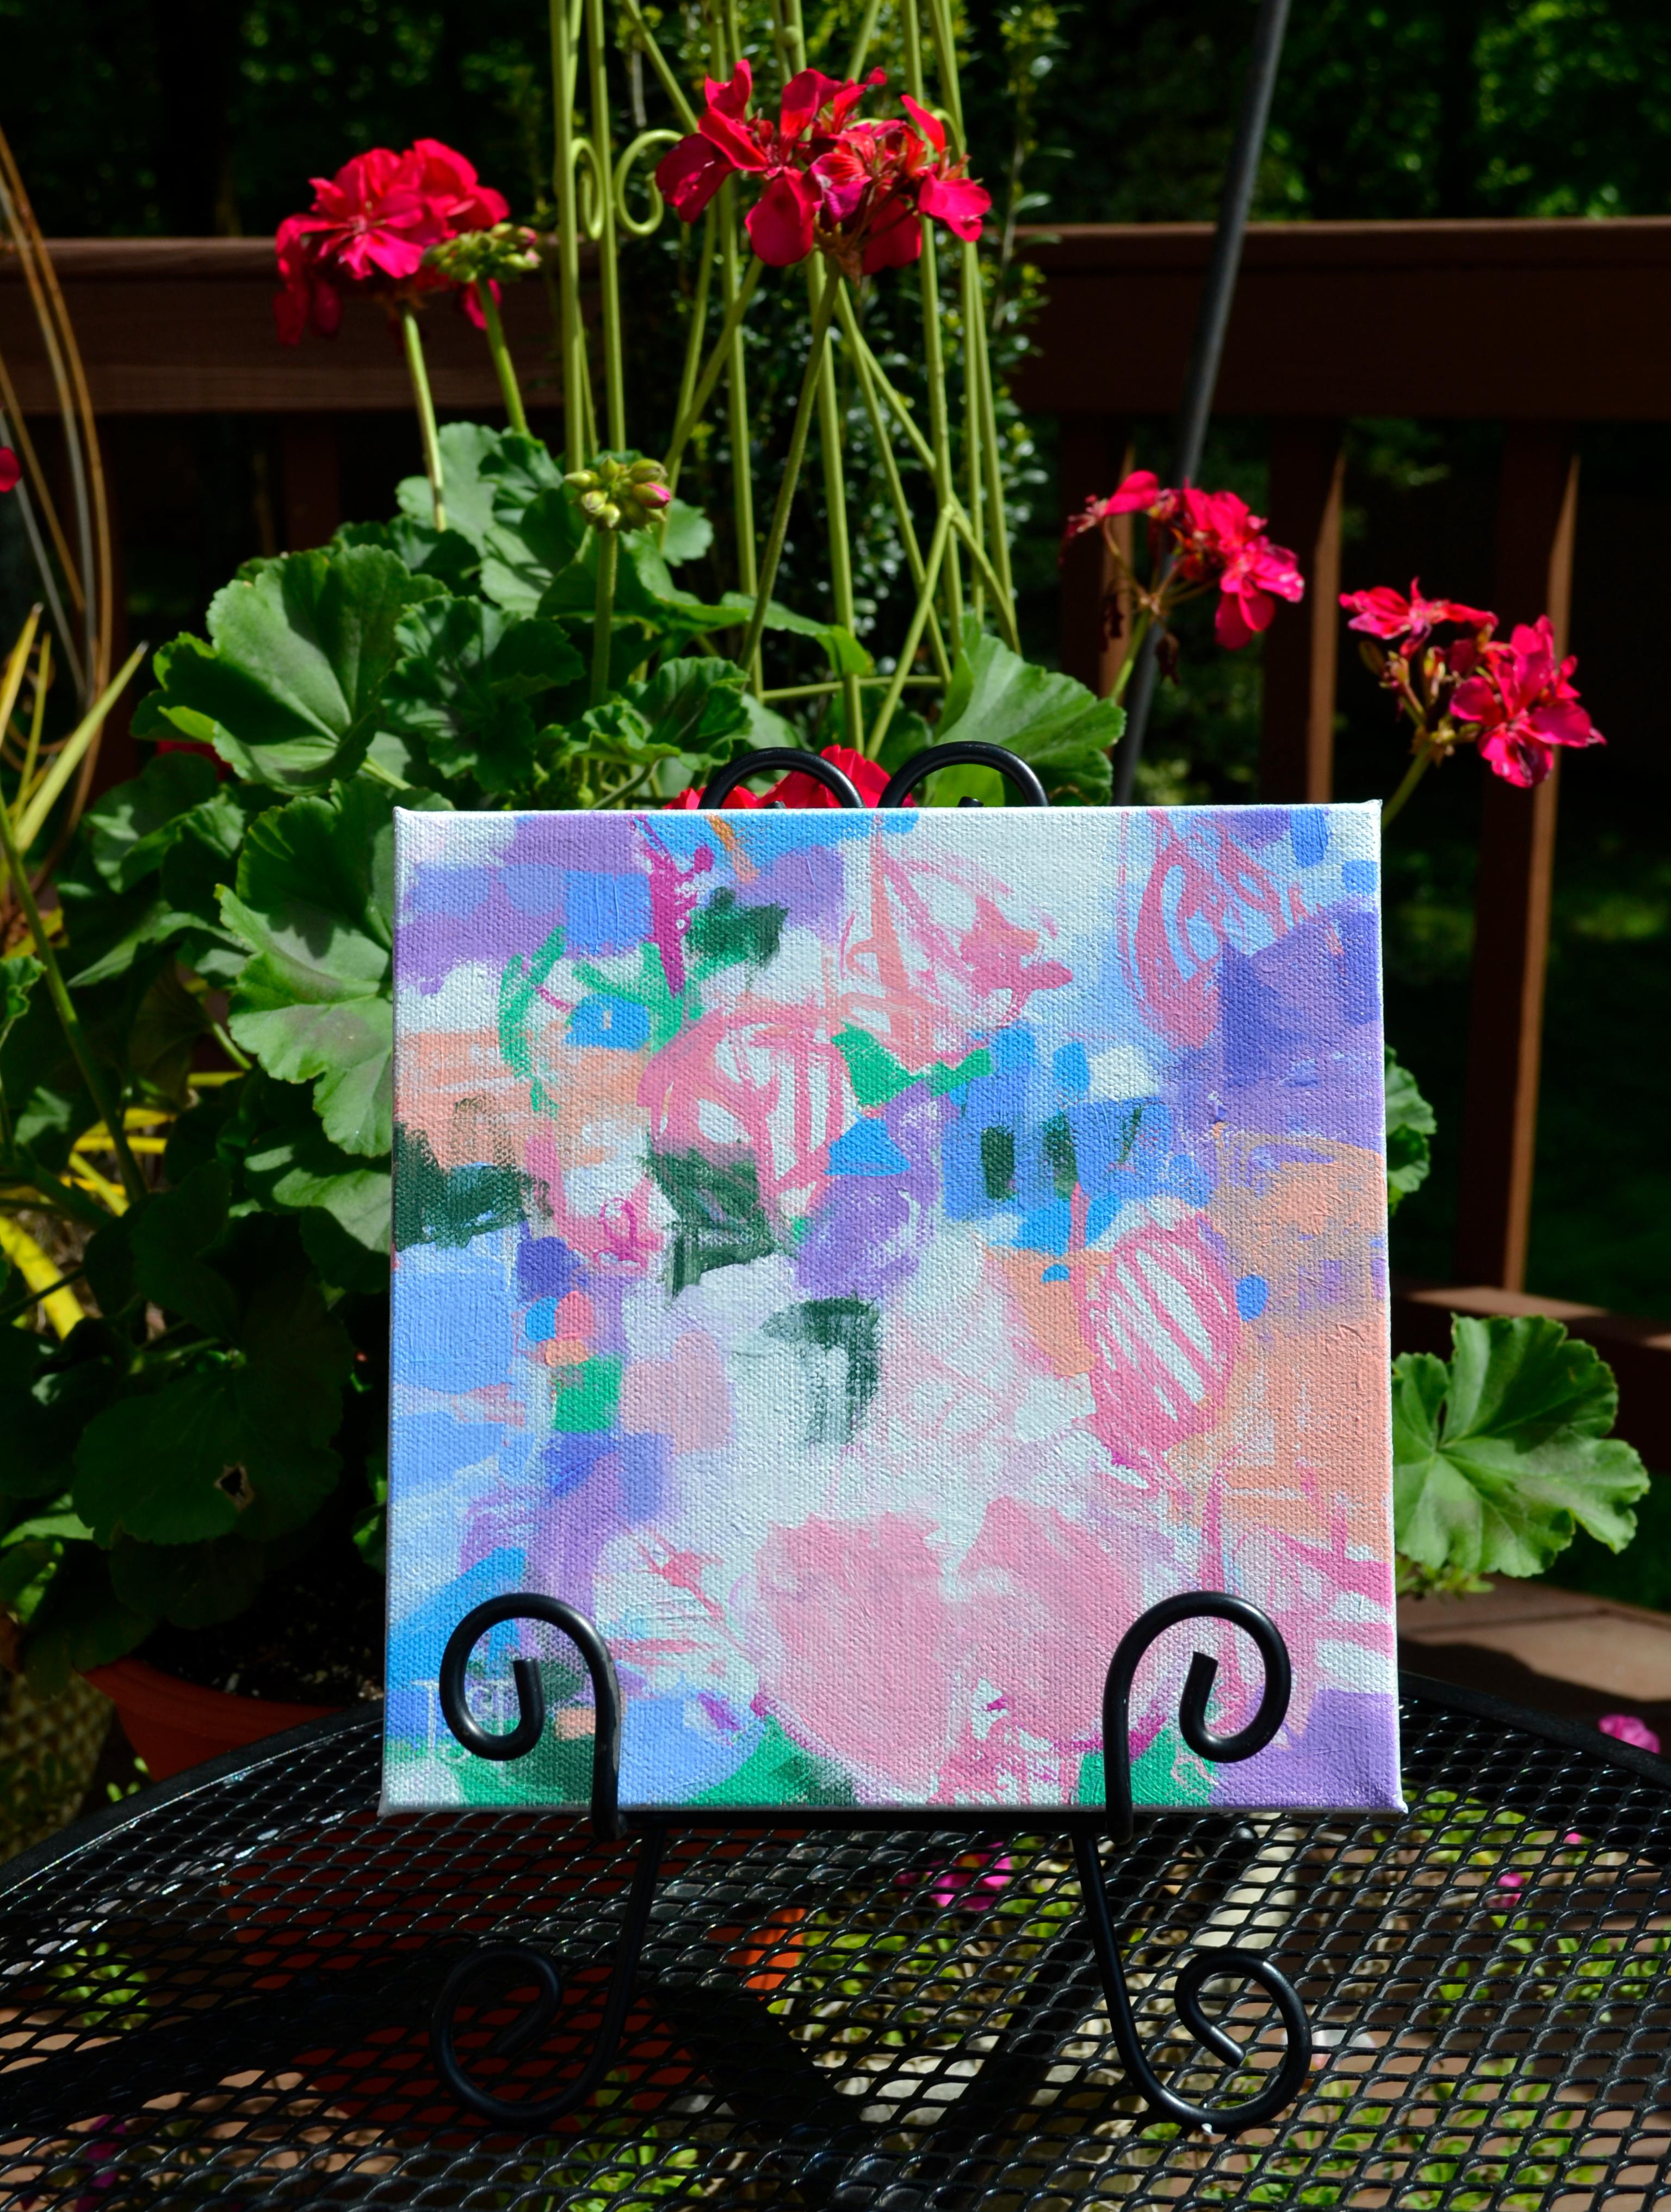 <p>Artist Comments<br>Pastel blossoms flourish in artist Natalie George's whimsical abstract piece. She reflects on the overwhelming wonderment felt when surrounded by beautiful flowers at their peak. Soft petals and light fragrances take form in